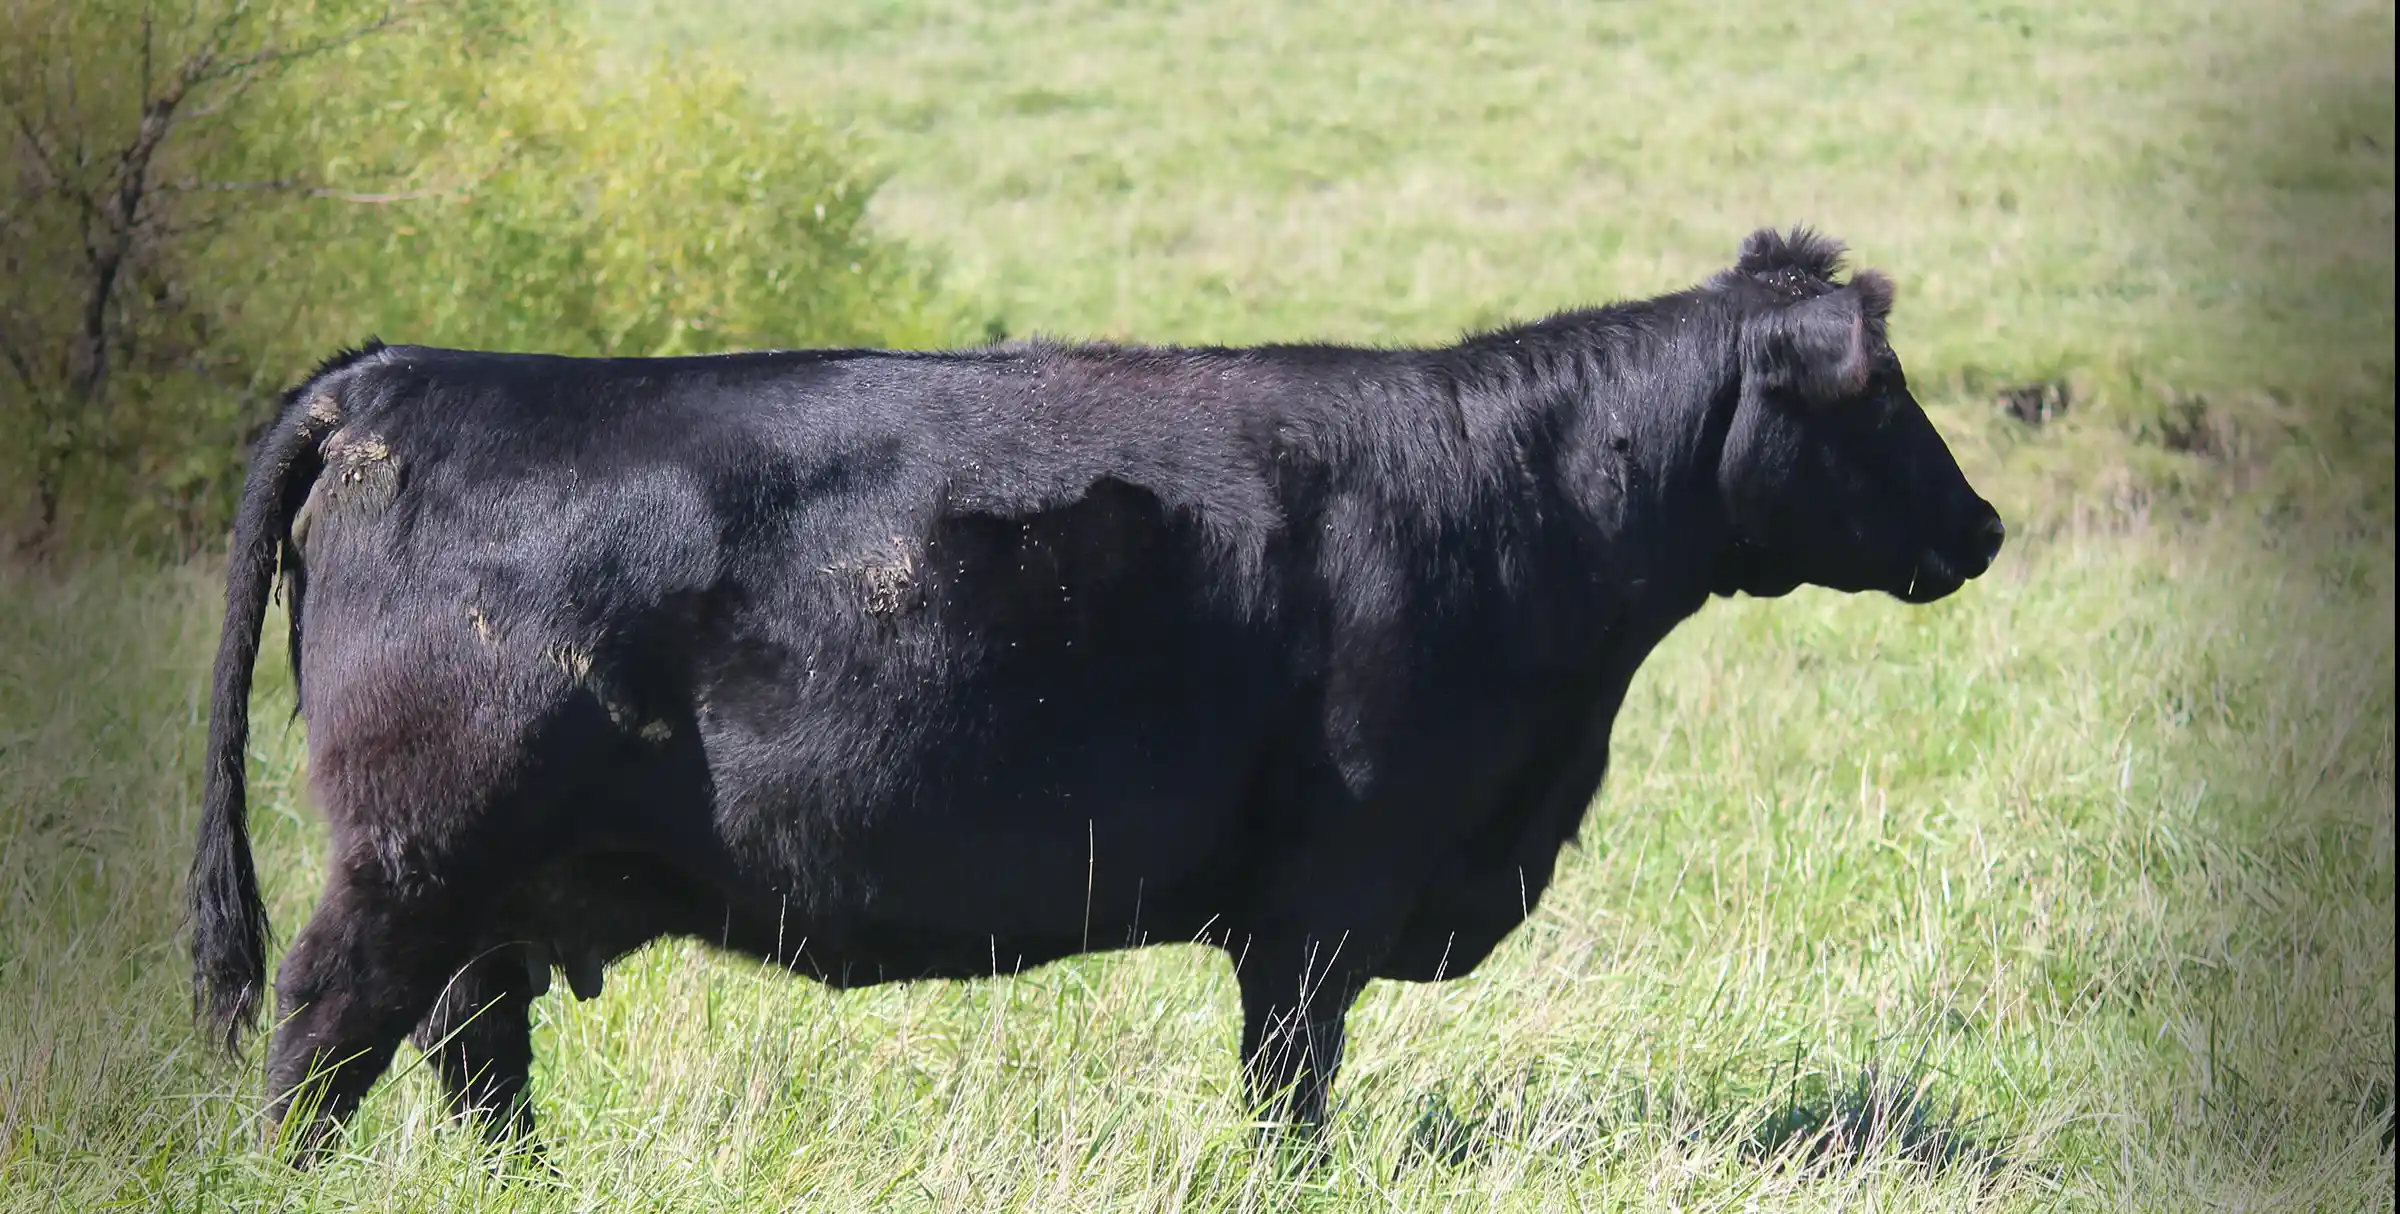 A Black Angus cow stands in a pasture at Carstens Farms.